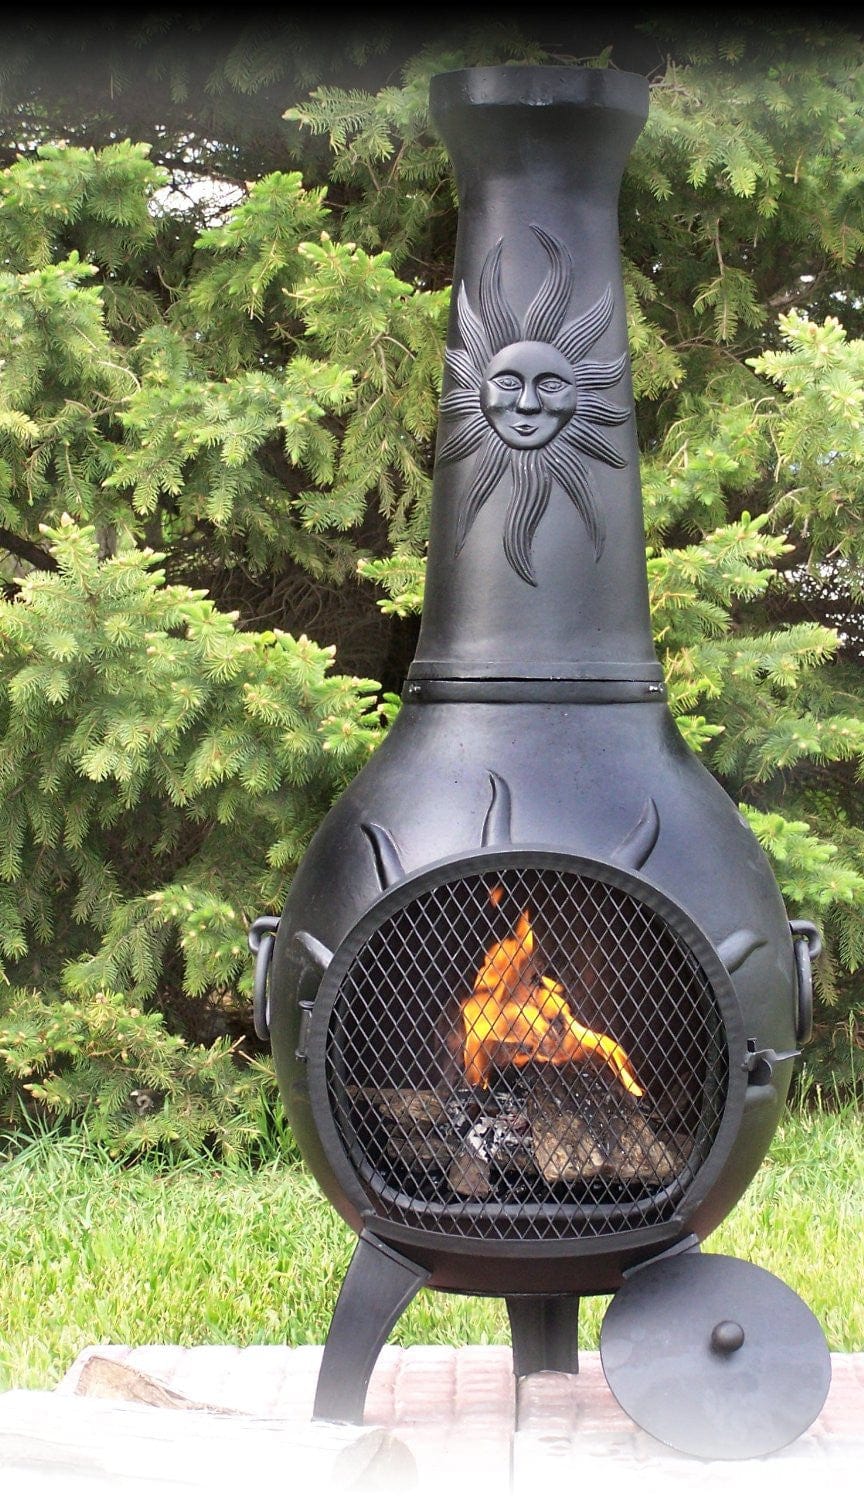 The Blue Rooster Sun Stack Chiminea